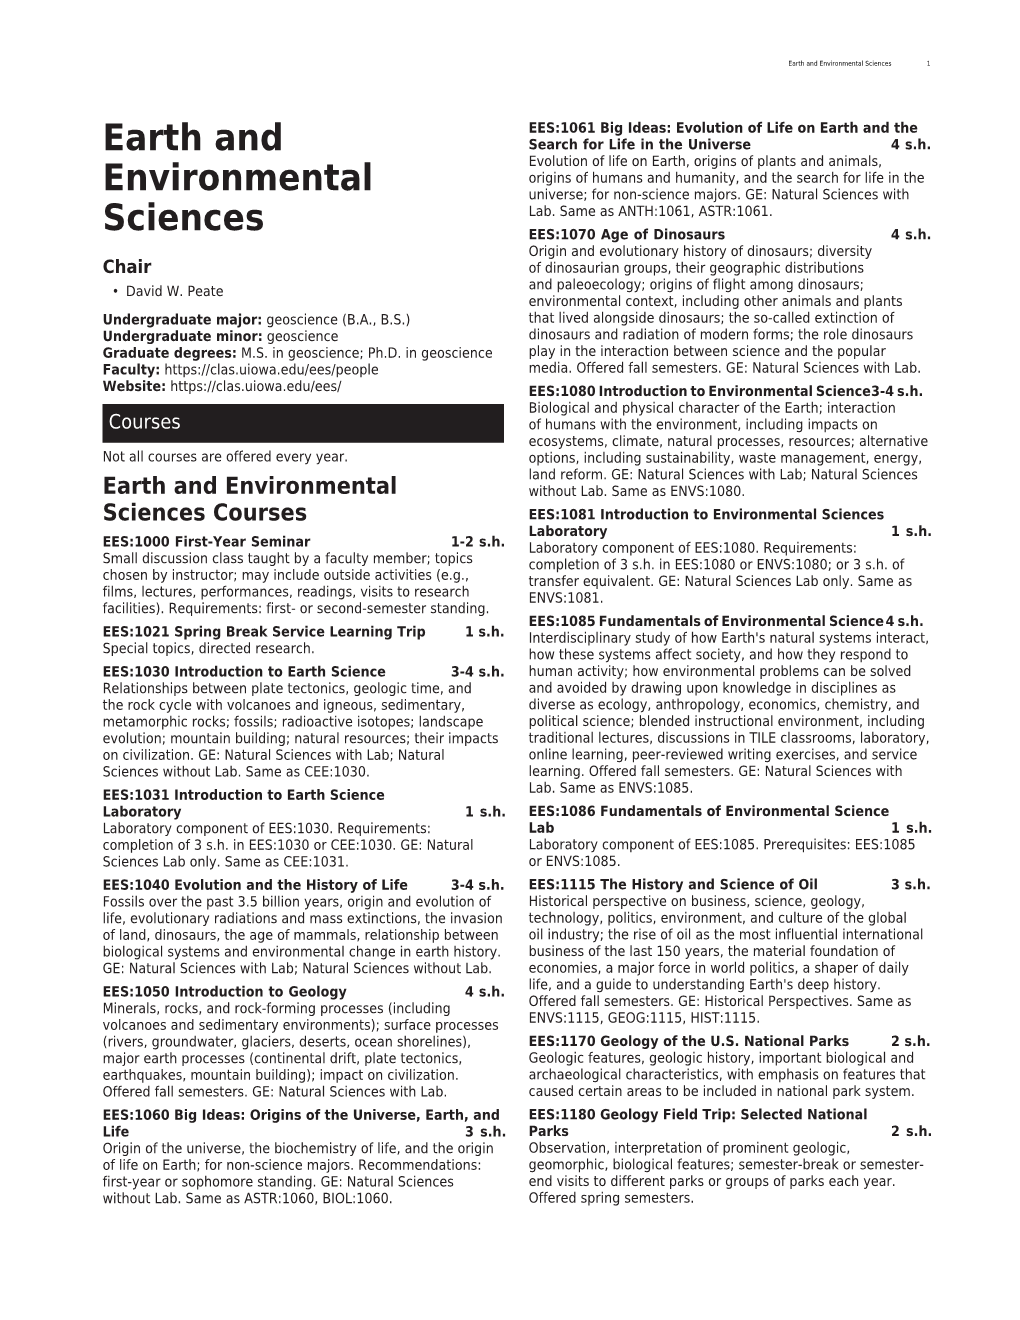 Earth and Environmental Sciences 1